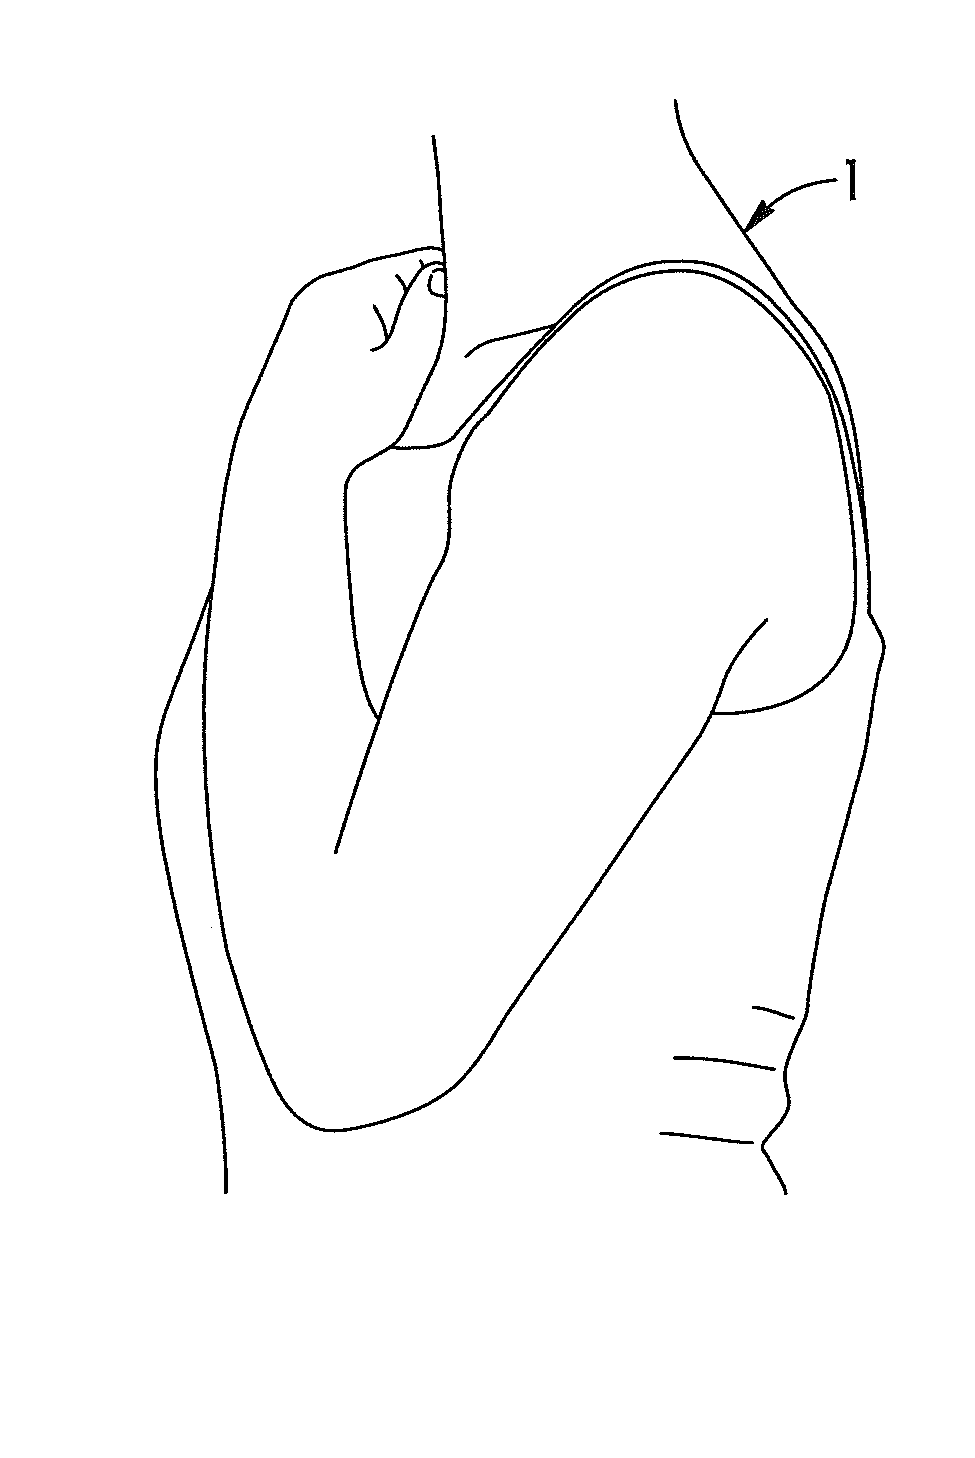 Skin coating composition and uses thereof